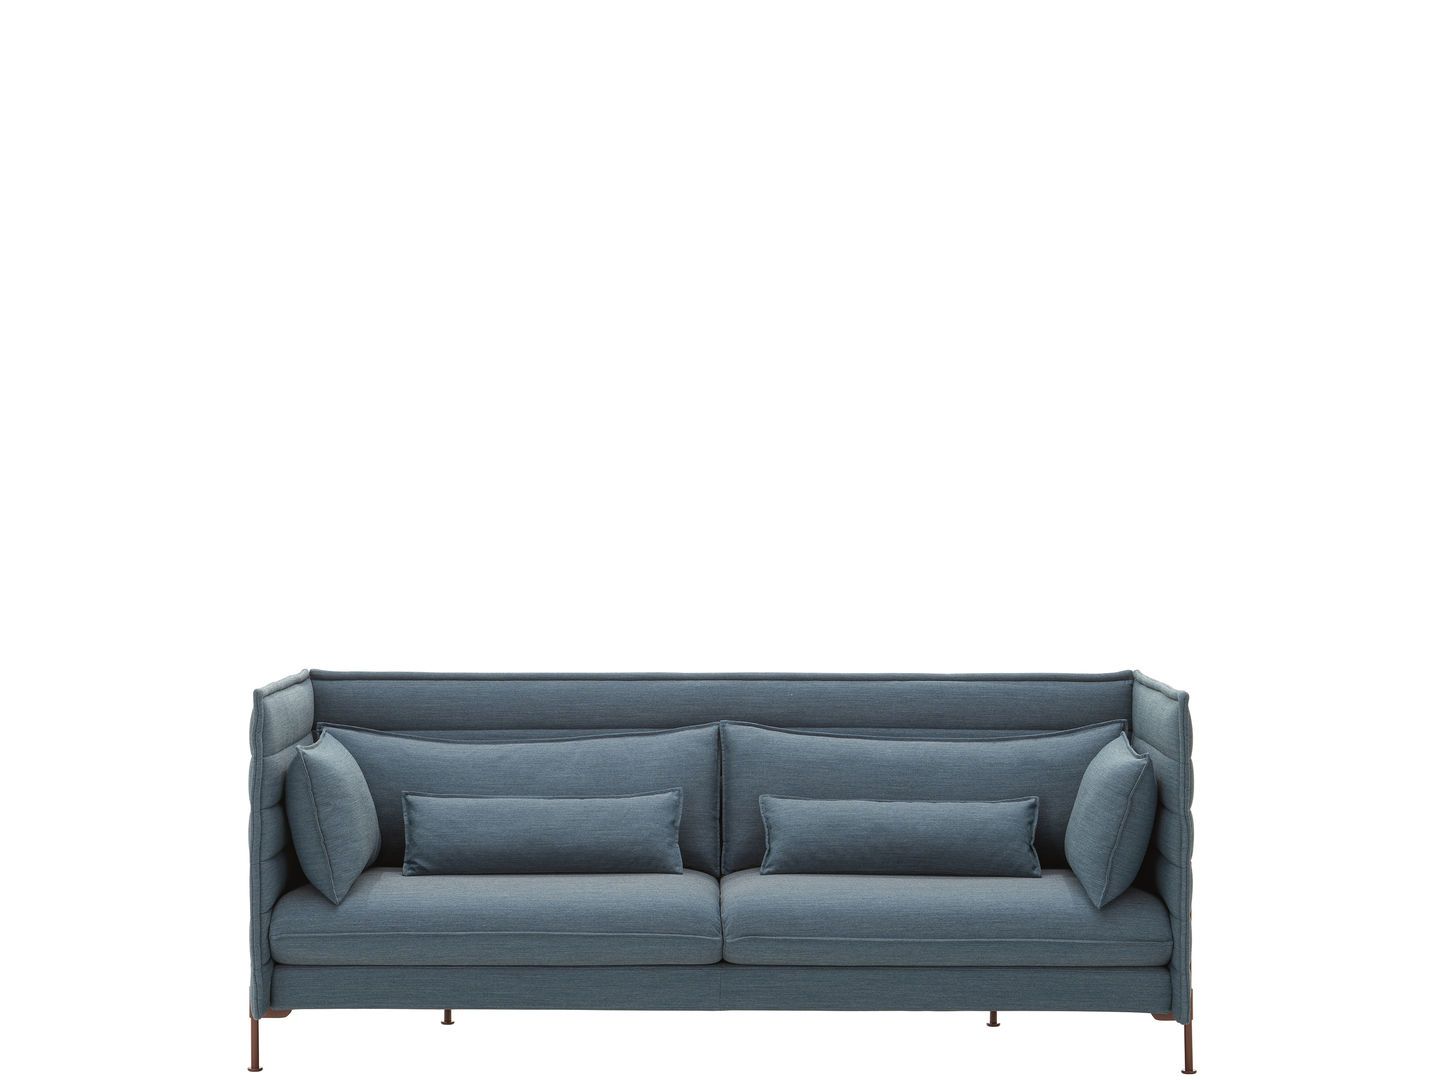 Vitra Alcove Sofa from One52 Furniture - A modern and stylish seating solution for any living space.